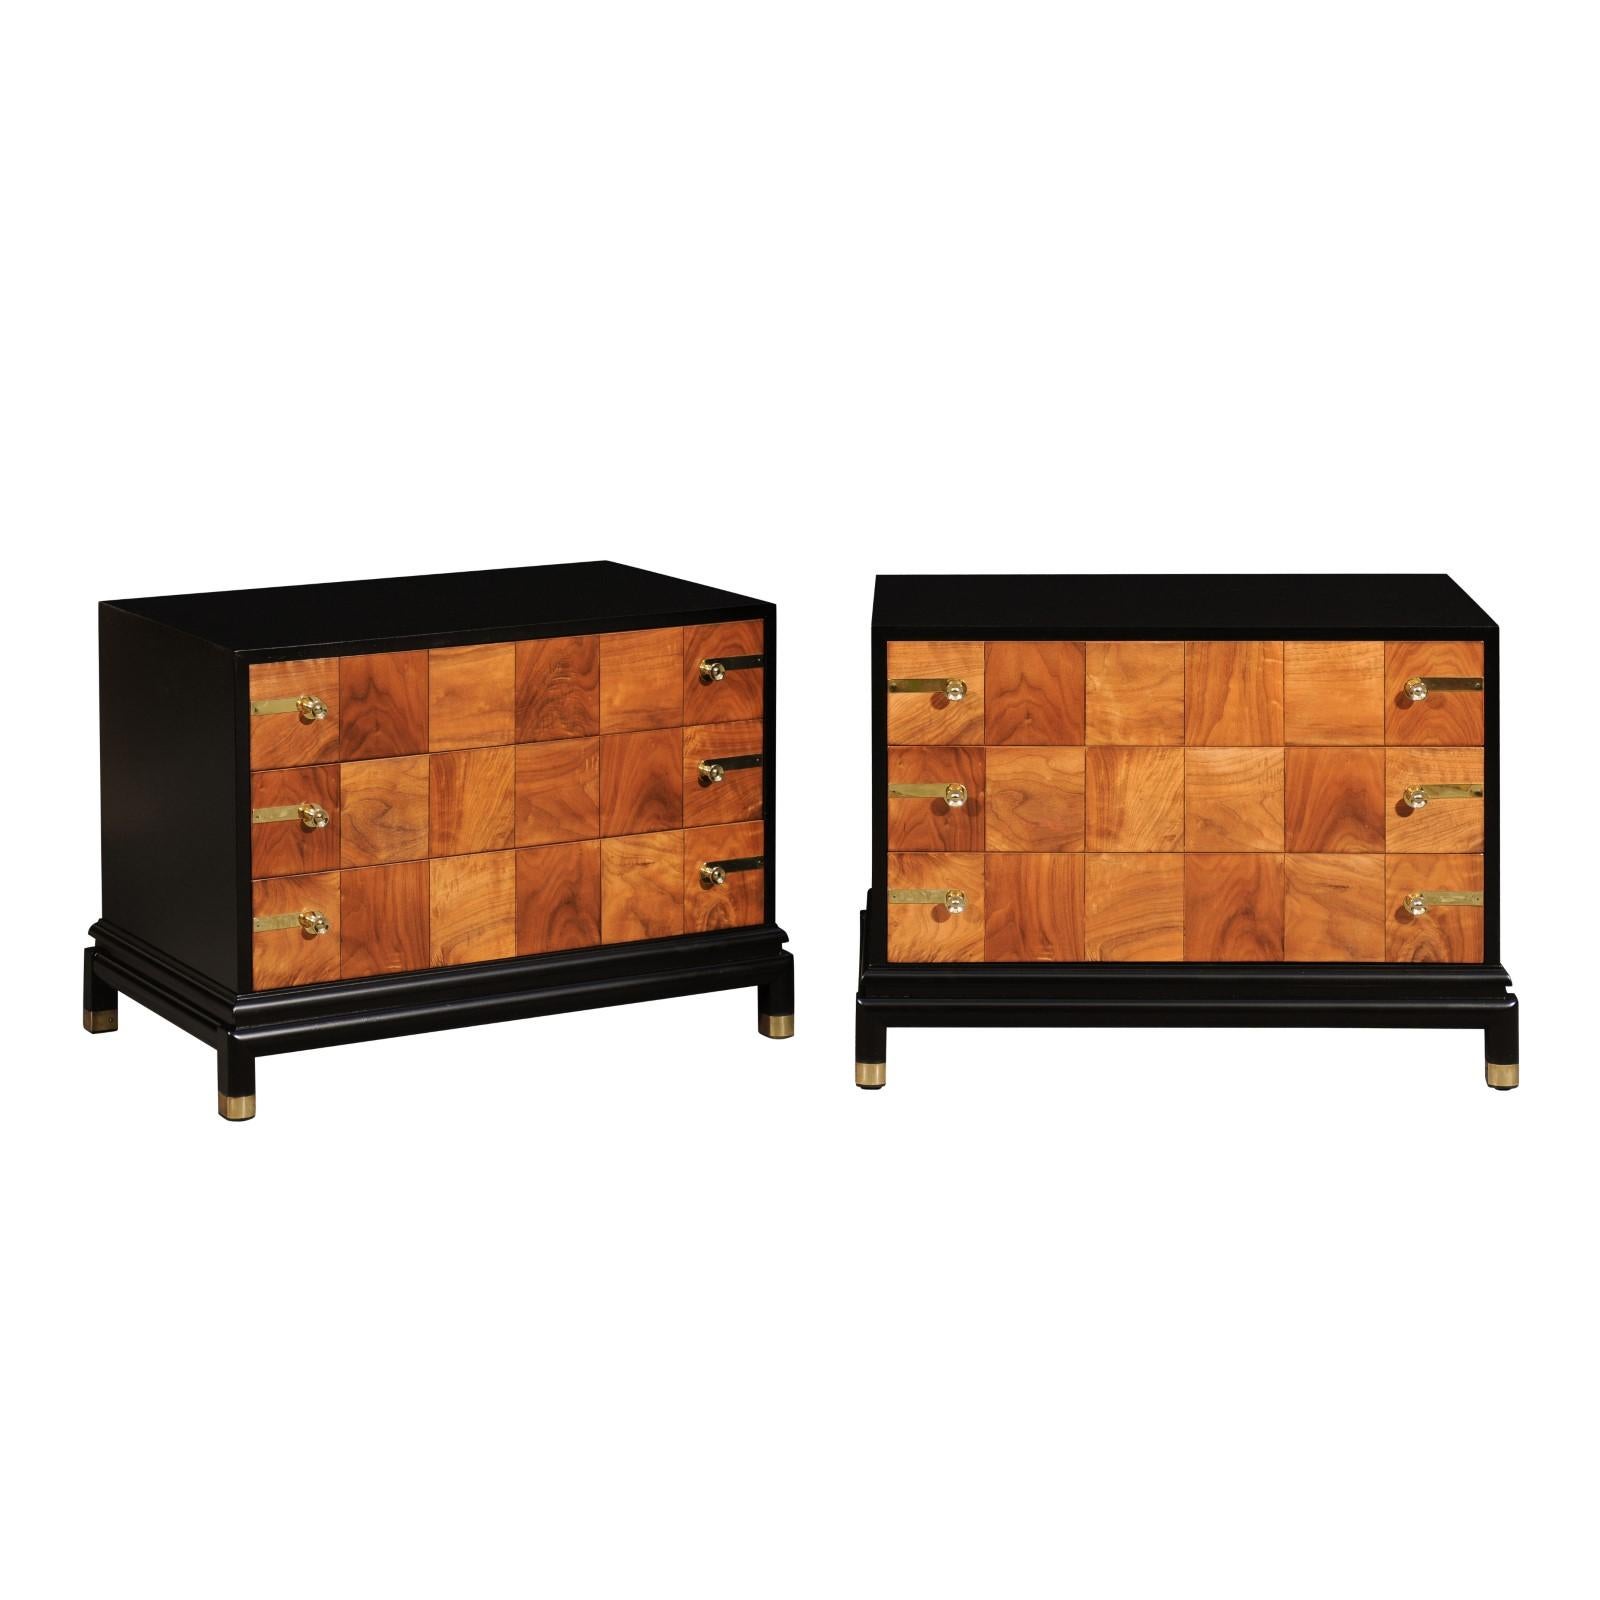 This magnificent pair of chests is shipped as professionally photographed and described in the listing narrative: Meticulously professionally restored and completely installation ready. These rare examples are unique on the market.

If a piece